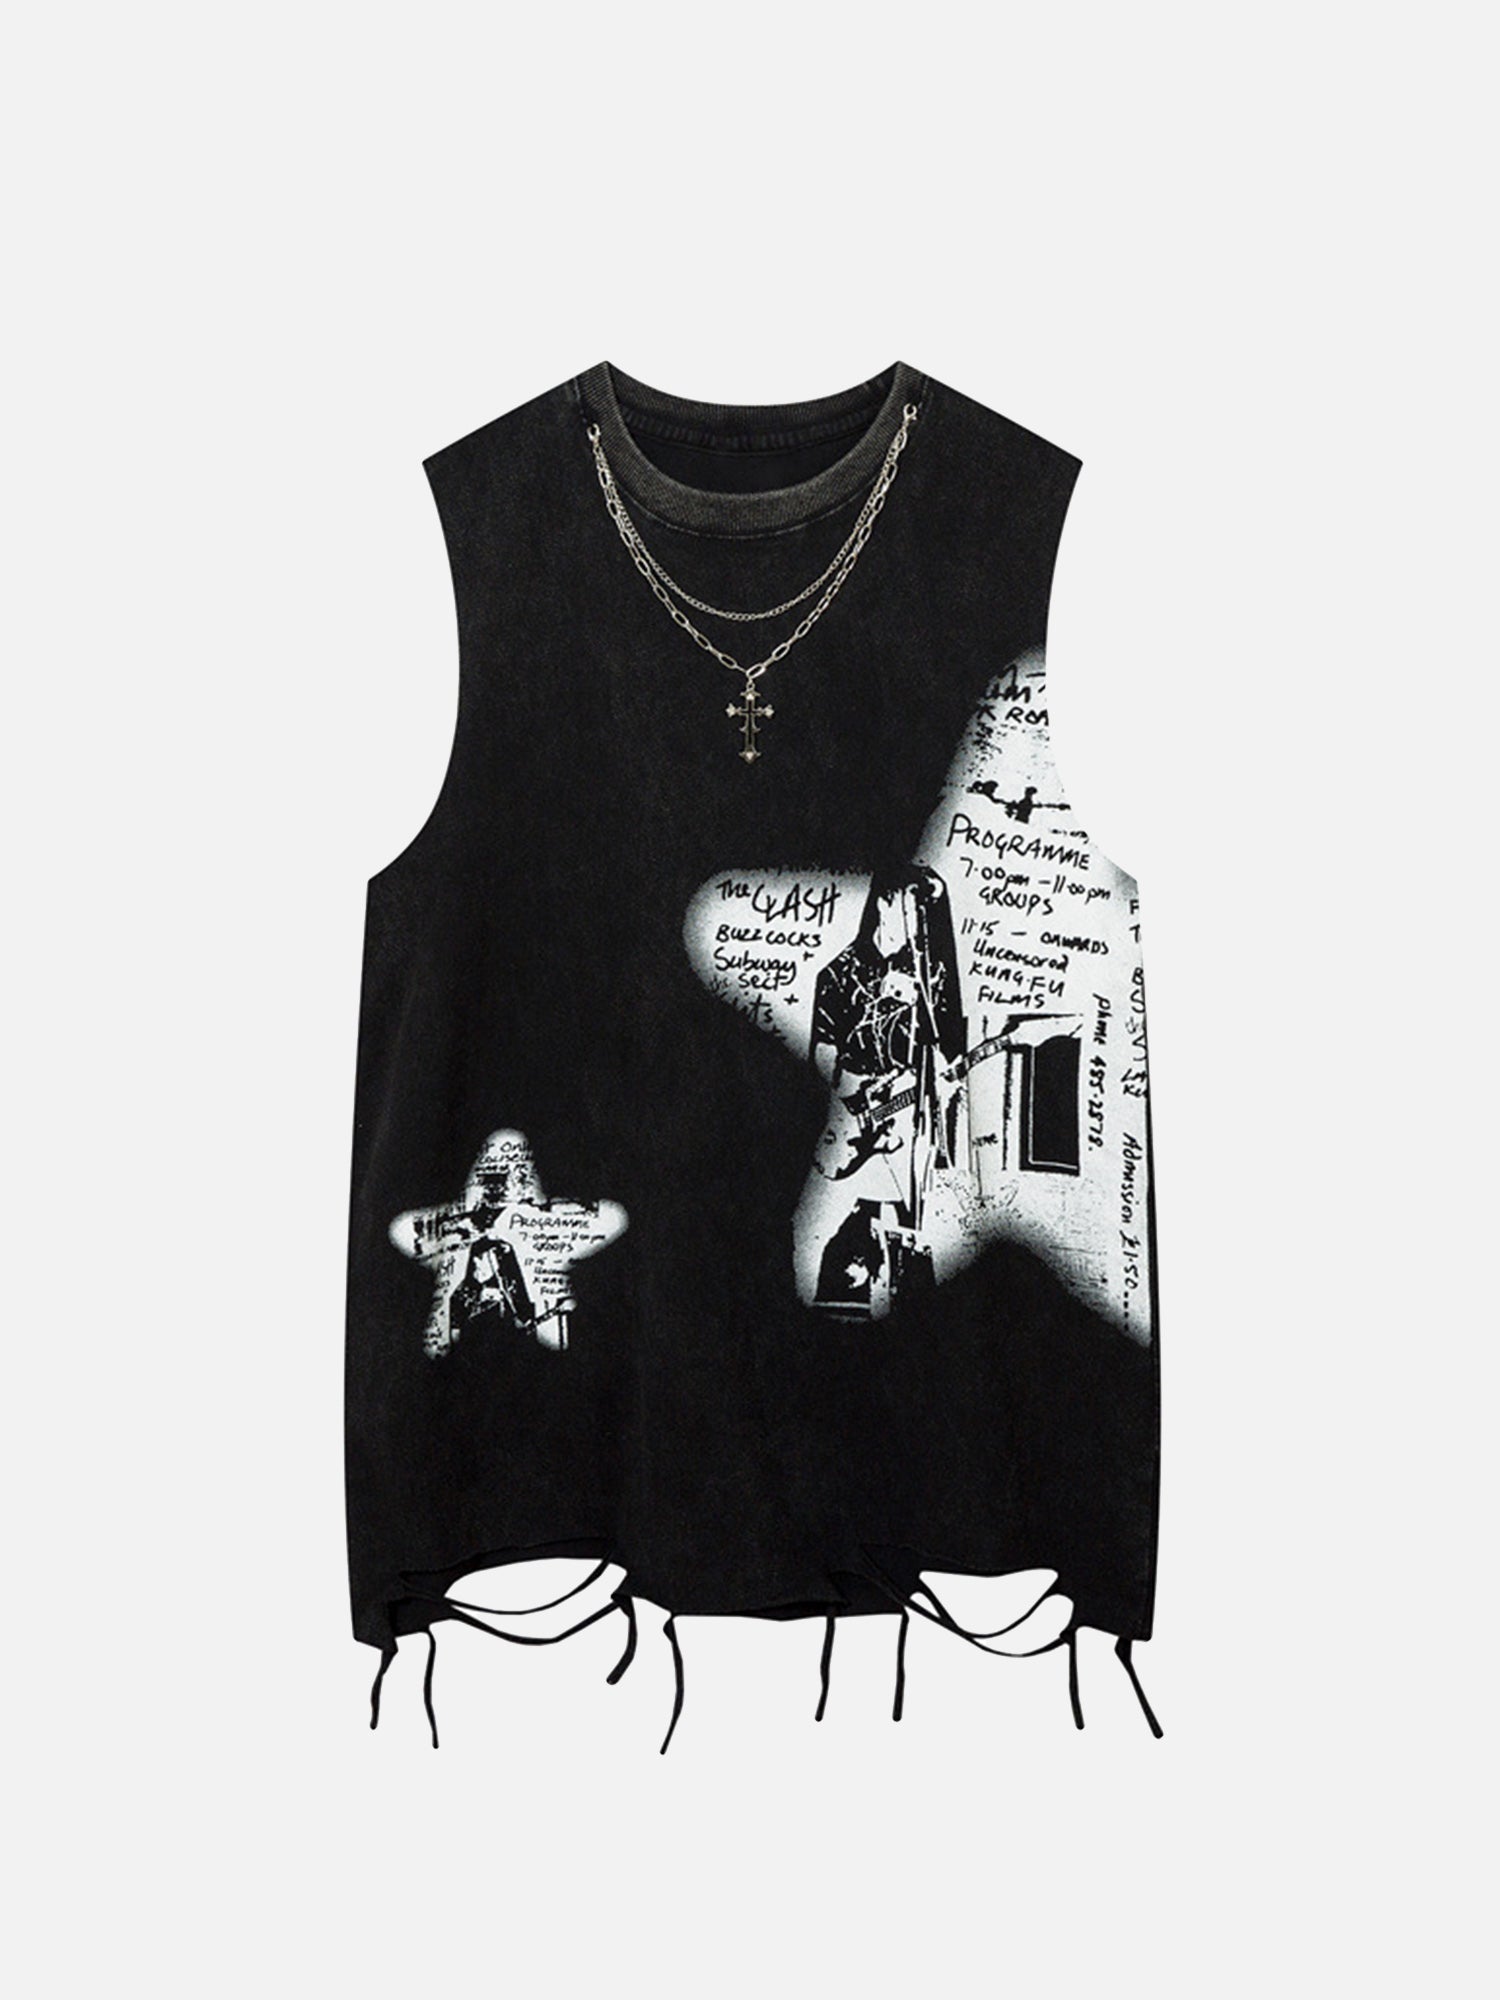 Thesupermade Vintage Necklace Star Print Sleeveless Hip-hop Tank Top